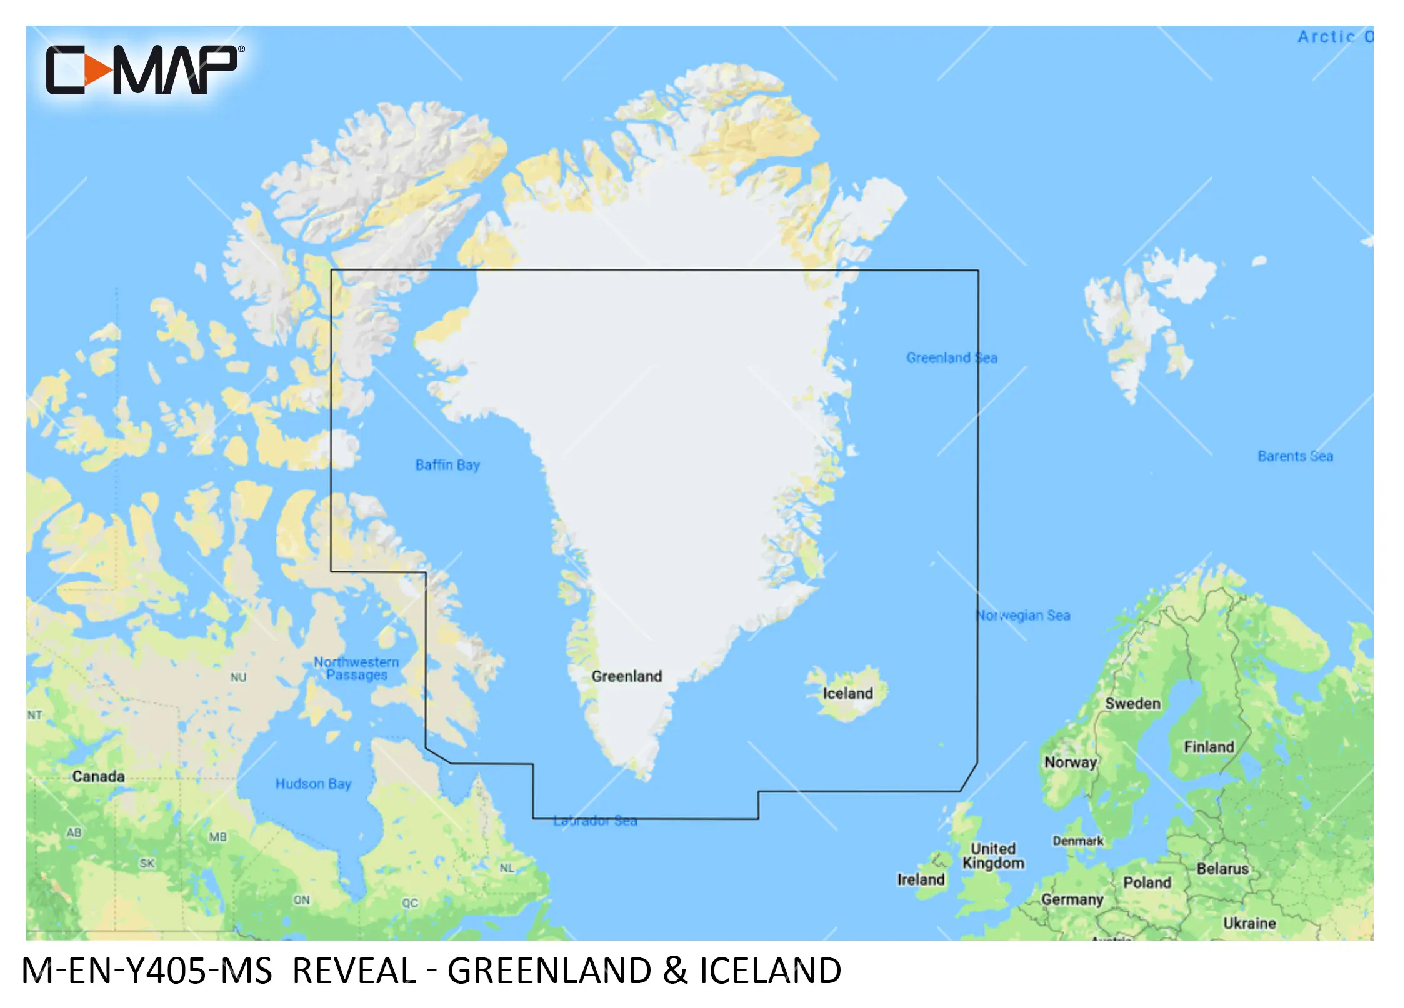 C-MAP Reveal Greenland and Iceland M-EN-Y405-MS